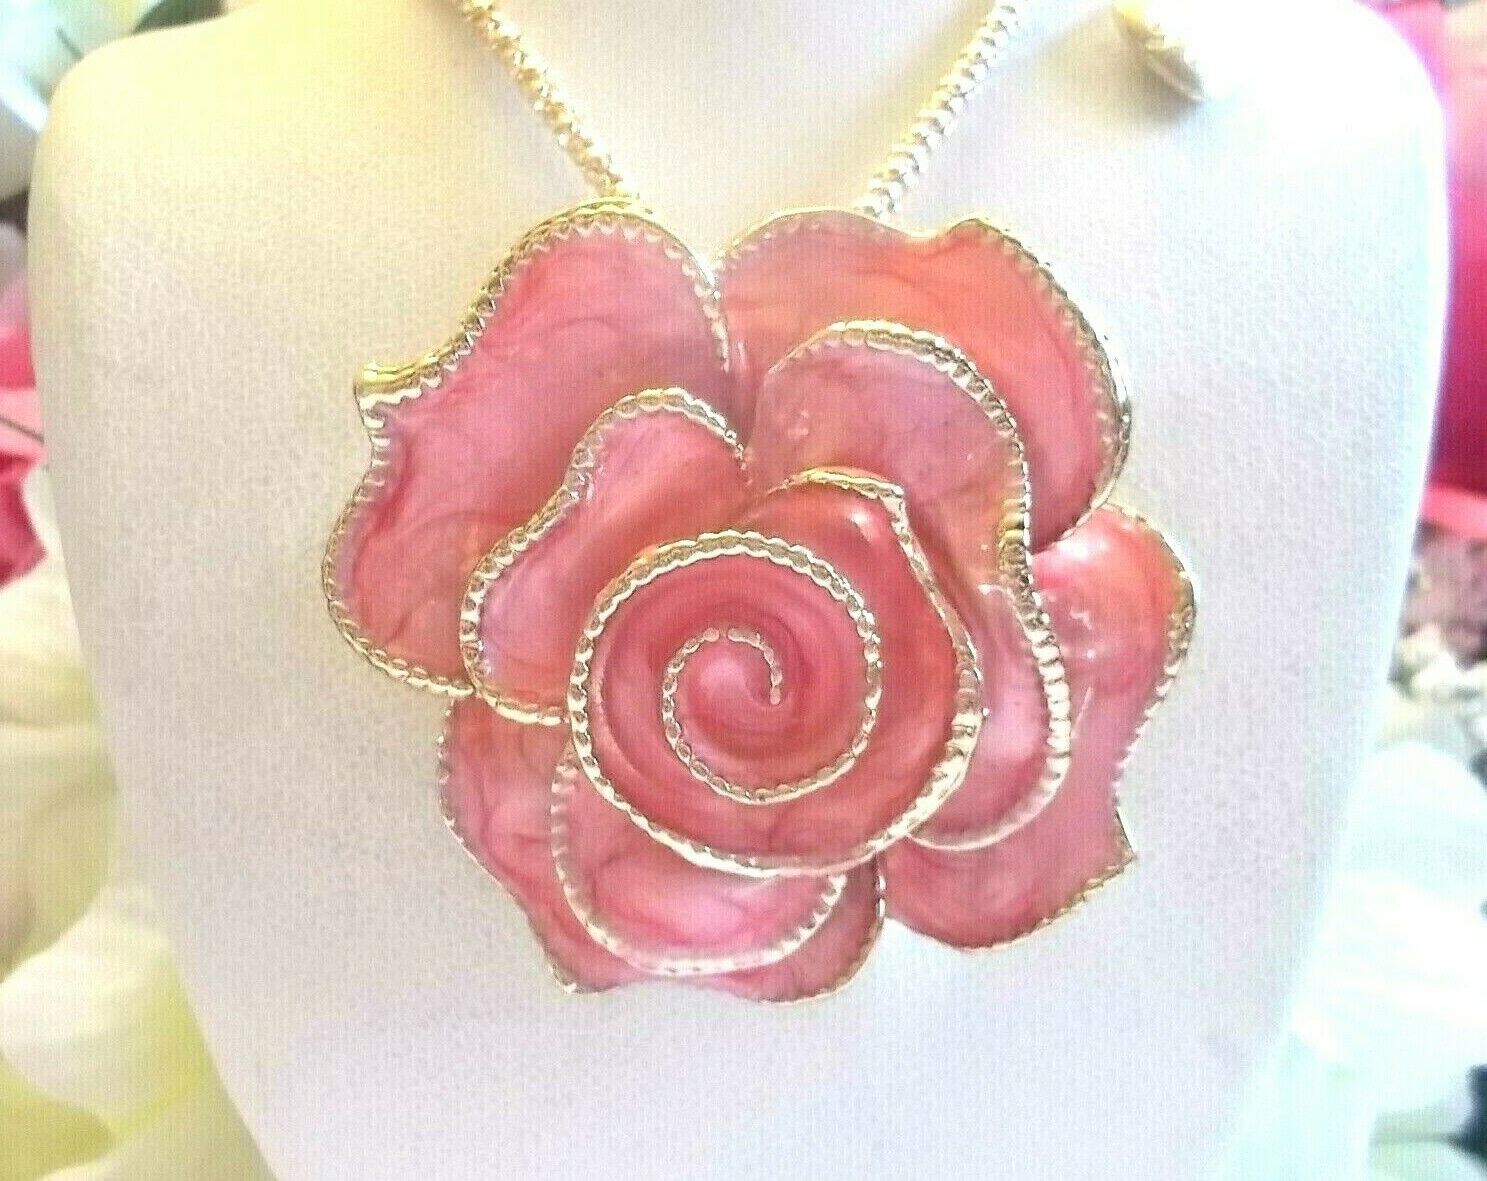 BETSEY JOHNSON PINK ROSE IN FULL BLOOM PENDANT CHAIN NECKLACE GOLD TONE-NWT